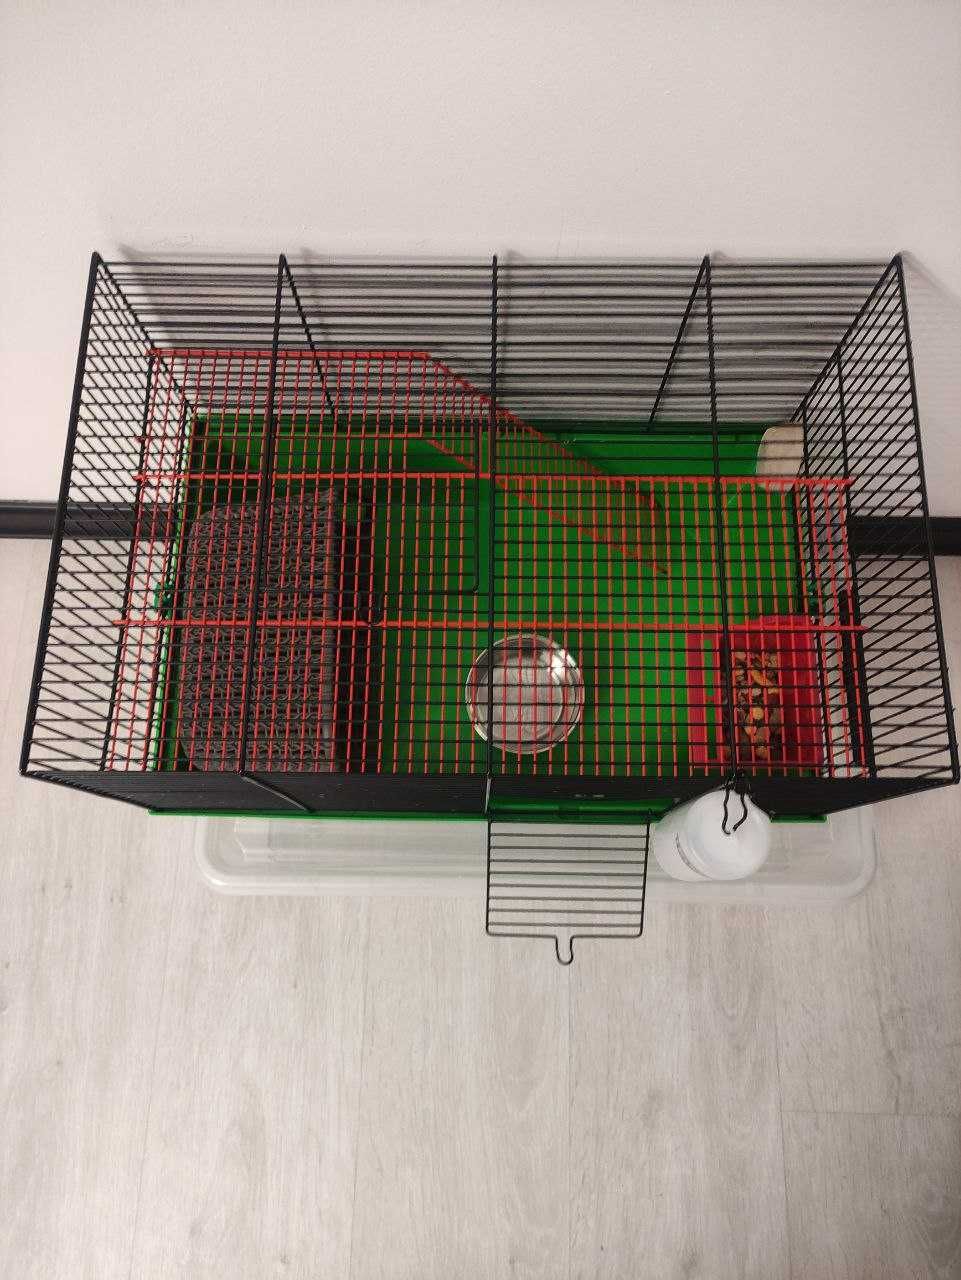 Cage for rats, hamsters or mice